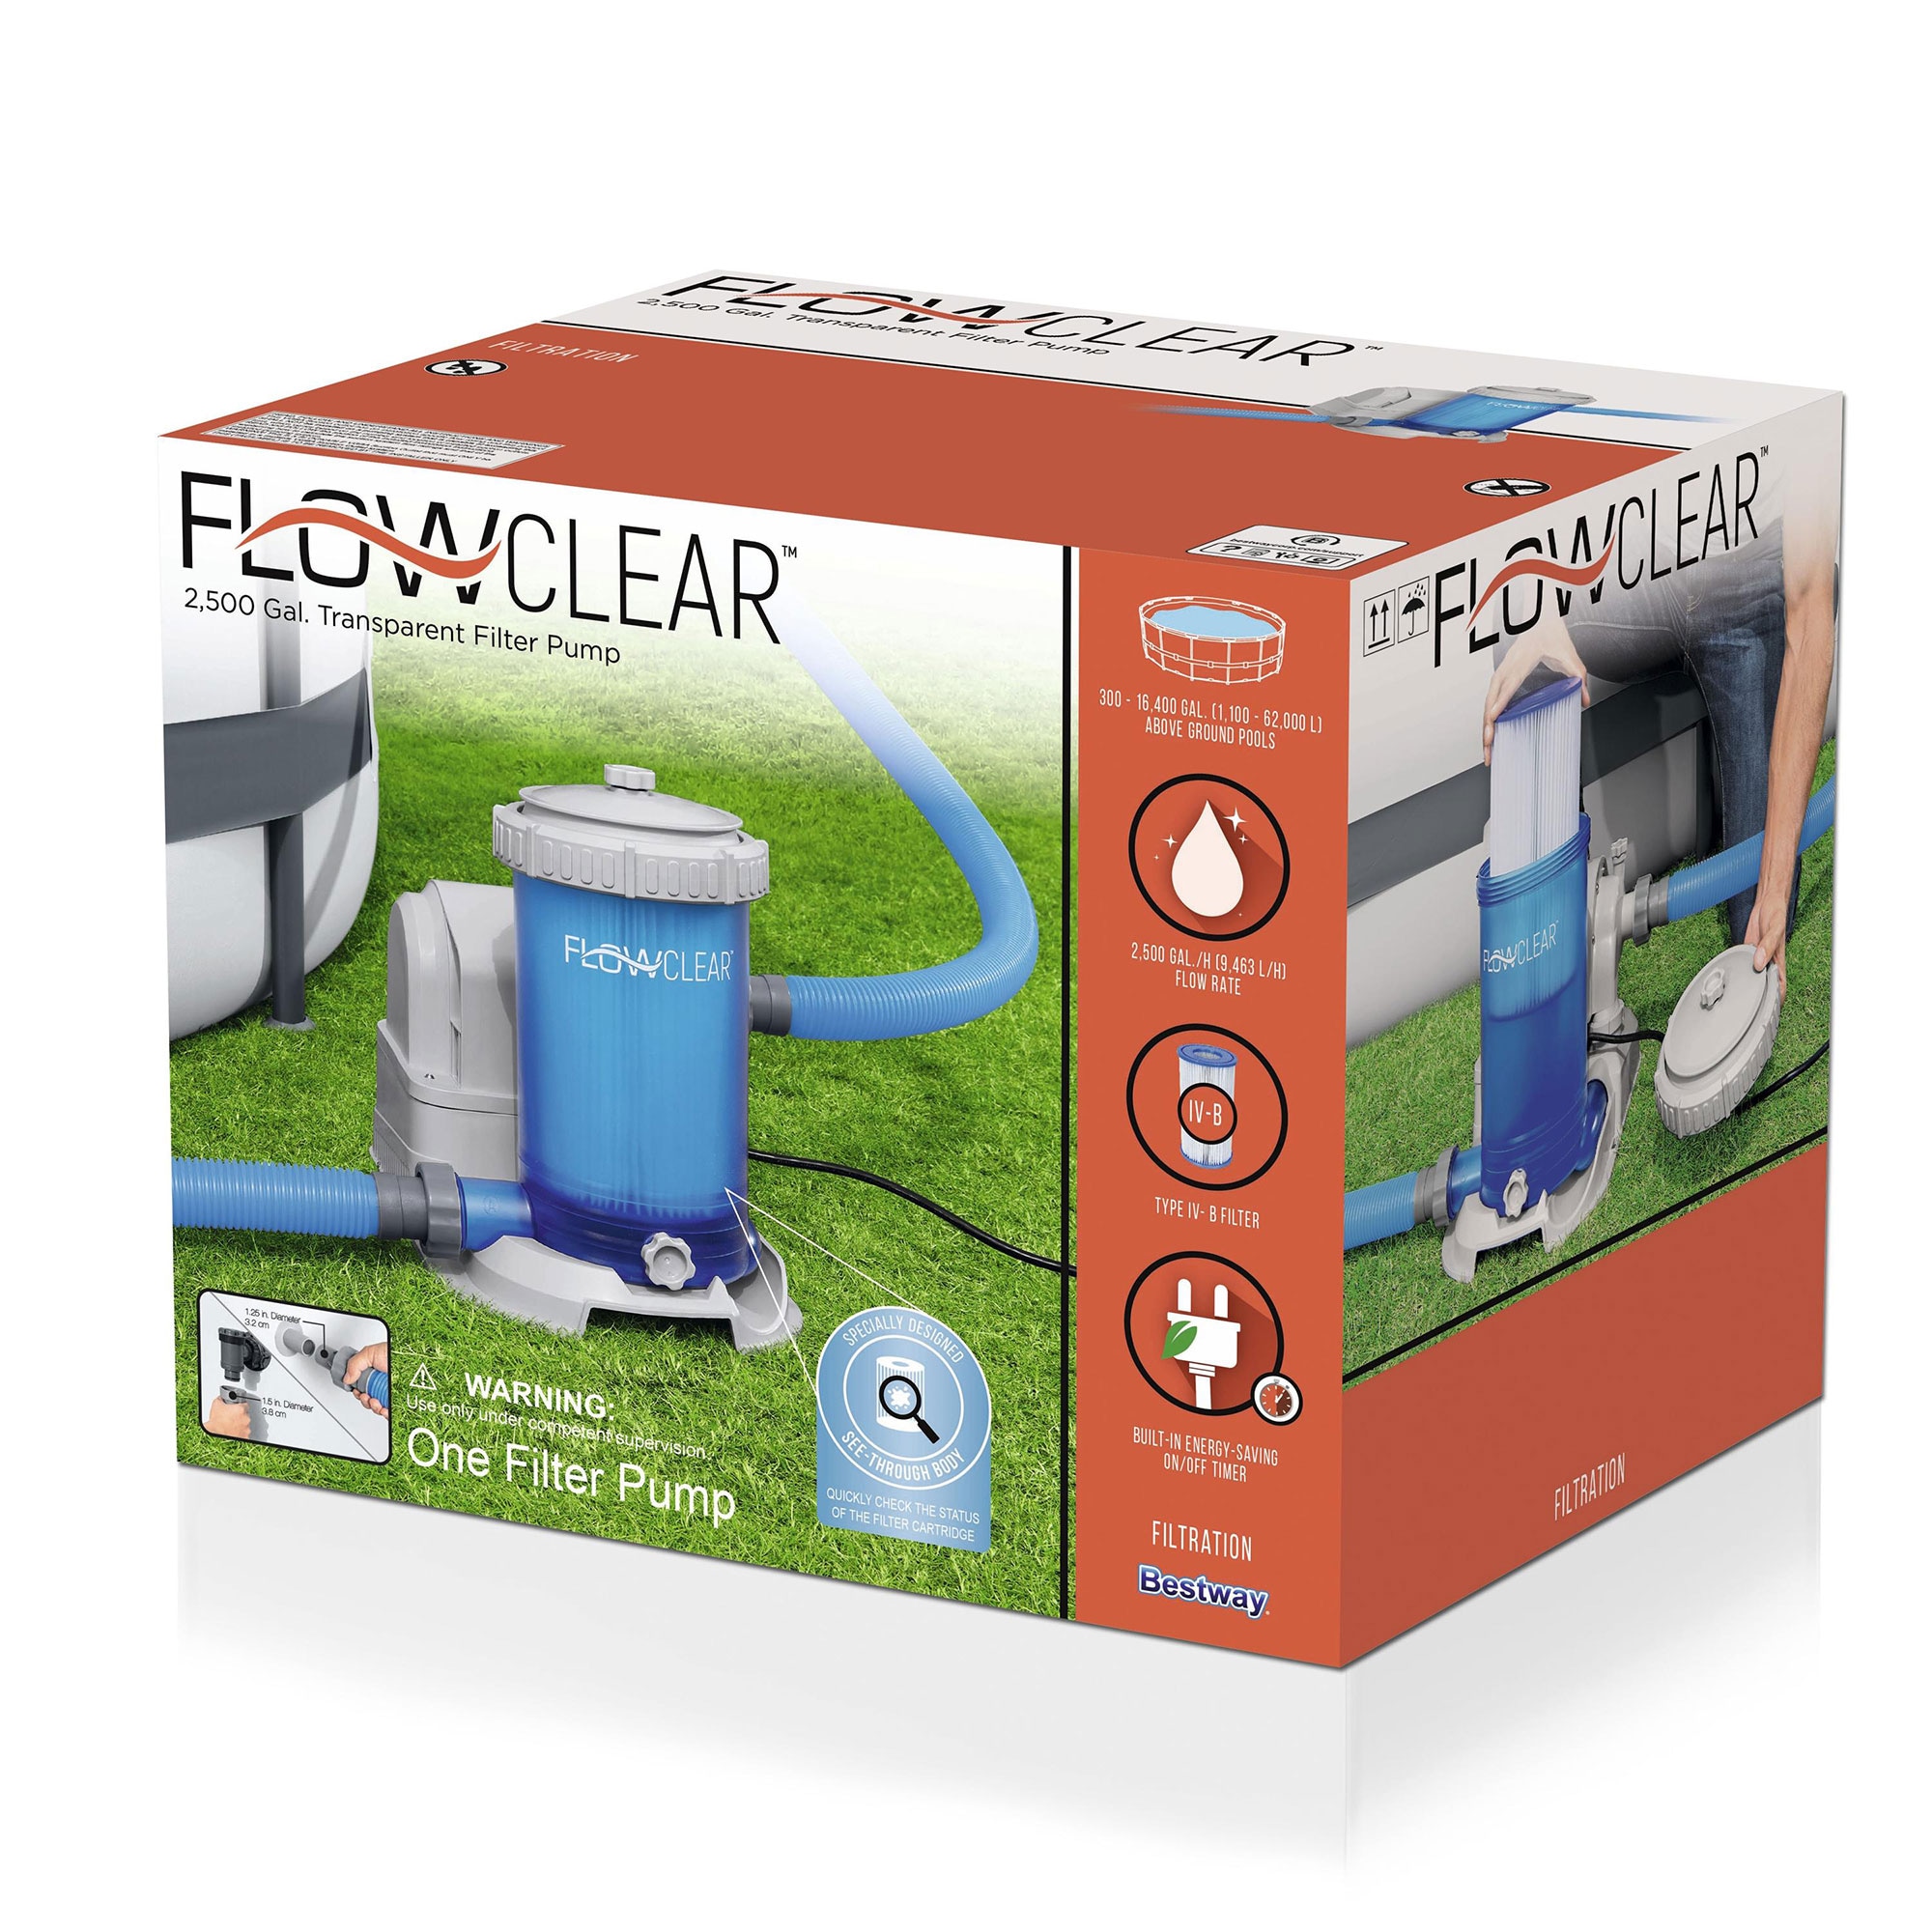 2500 Bestway Ground Flowclear Pump at 58671E-BW Bestway Transparent Filter Pool GPH Above